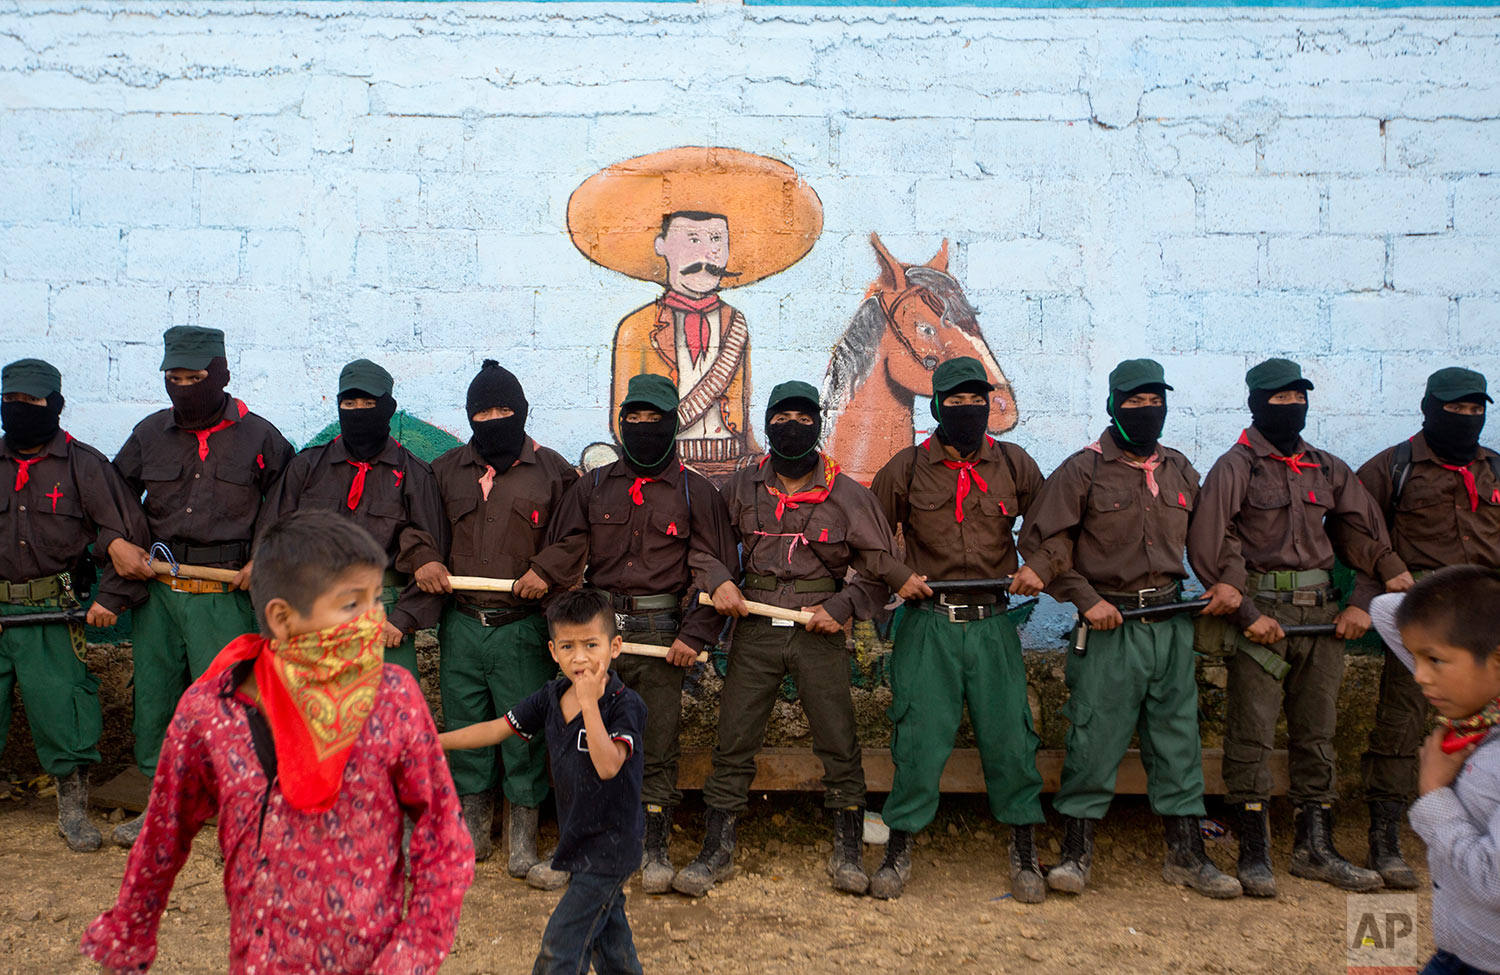  In this Monday, Oct. 16, 2017 photo, members of the Zapatista National Liberation Army (EZLN) provide security for a campaign rally by presidential candidate for the National Indigenous Congress, Maria de Jesus Patricio, in the Zapatista stronghold 